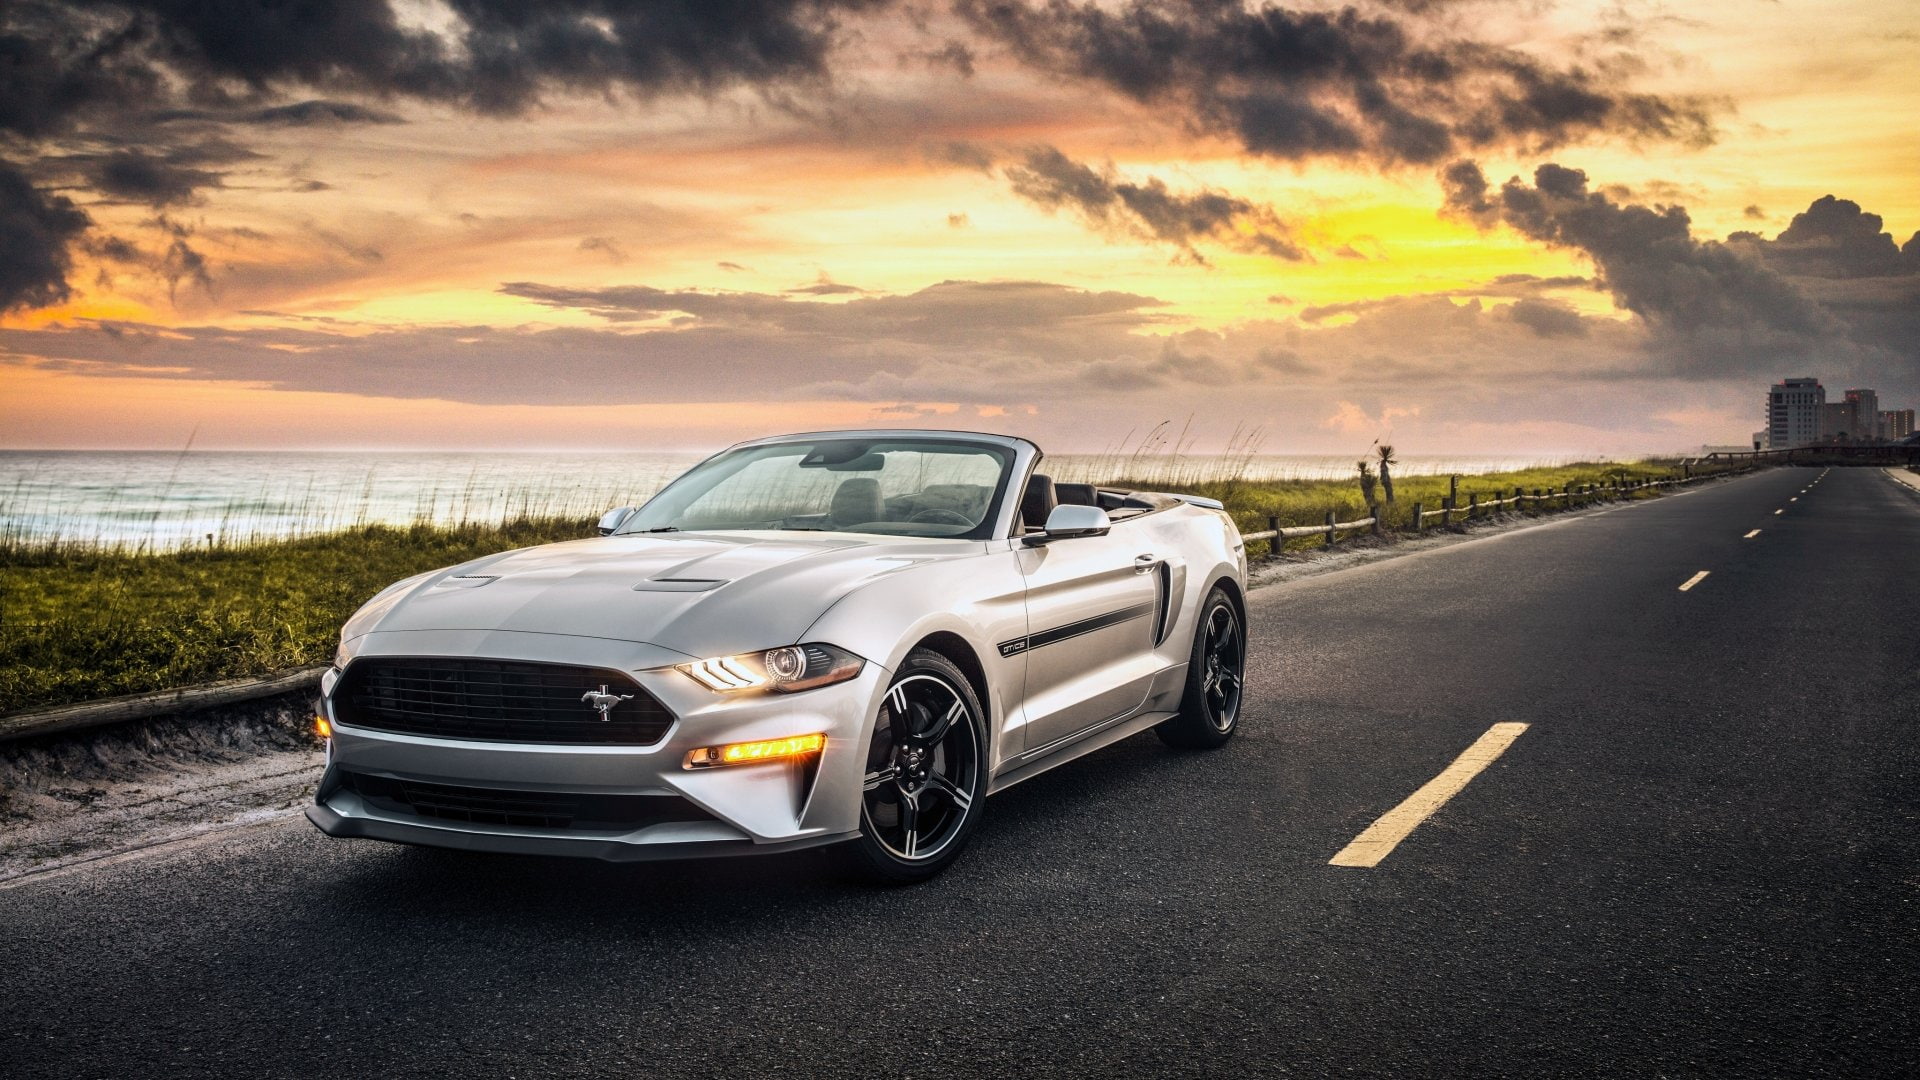 Ford, Ford Mustang GT, Car, Muscle Car, Silver Car, Vehicle